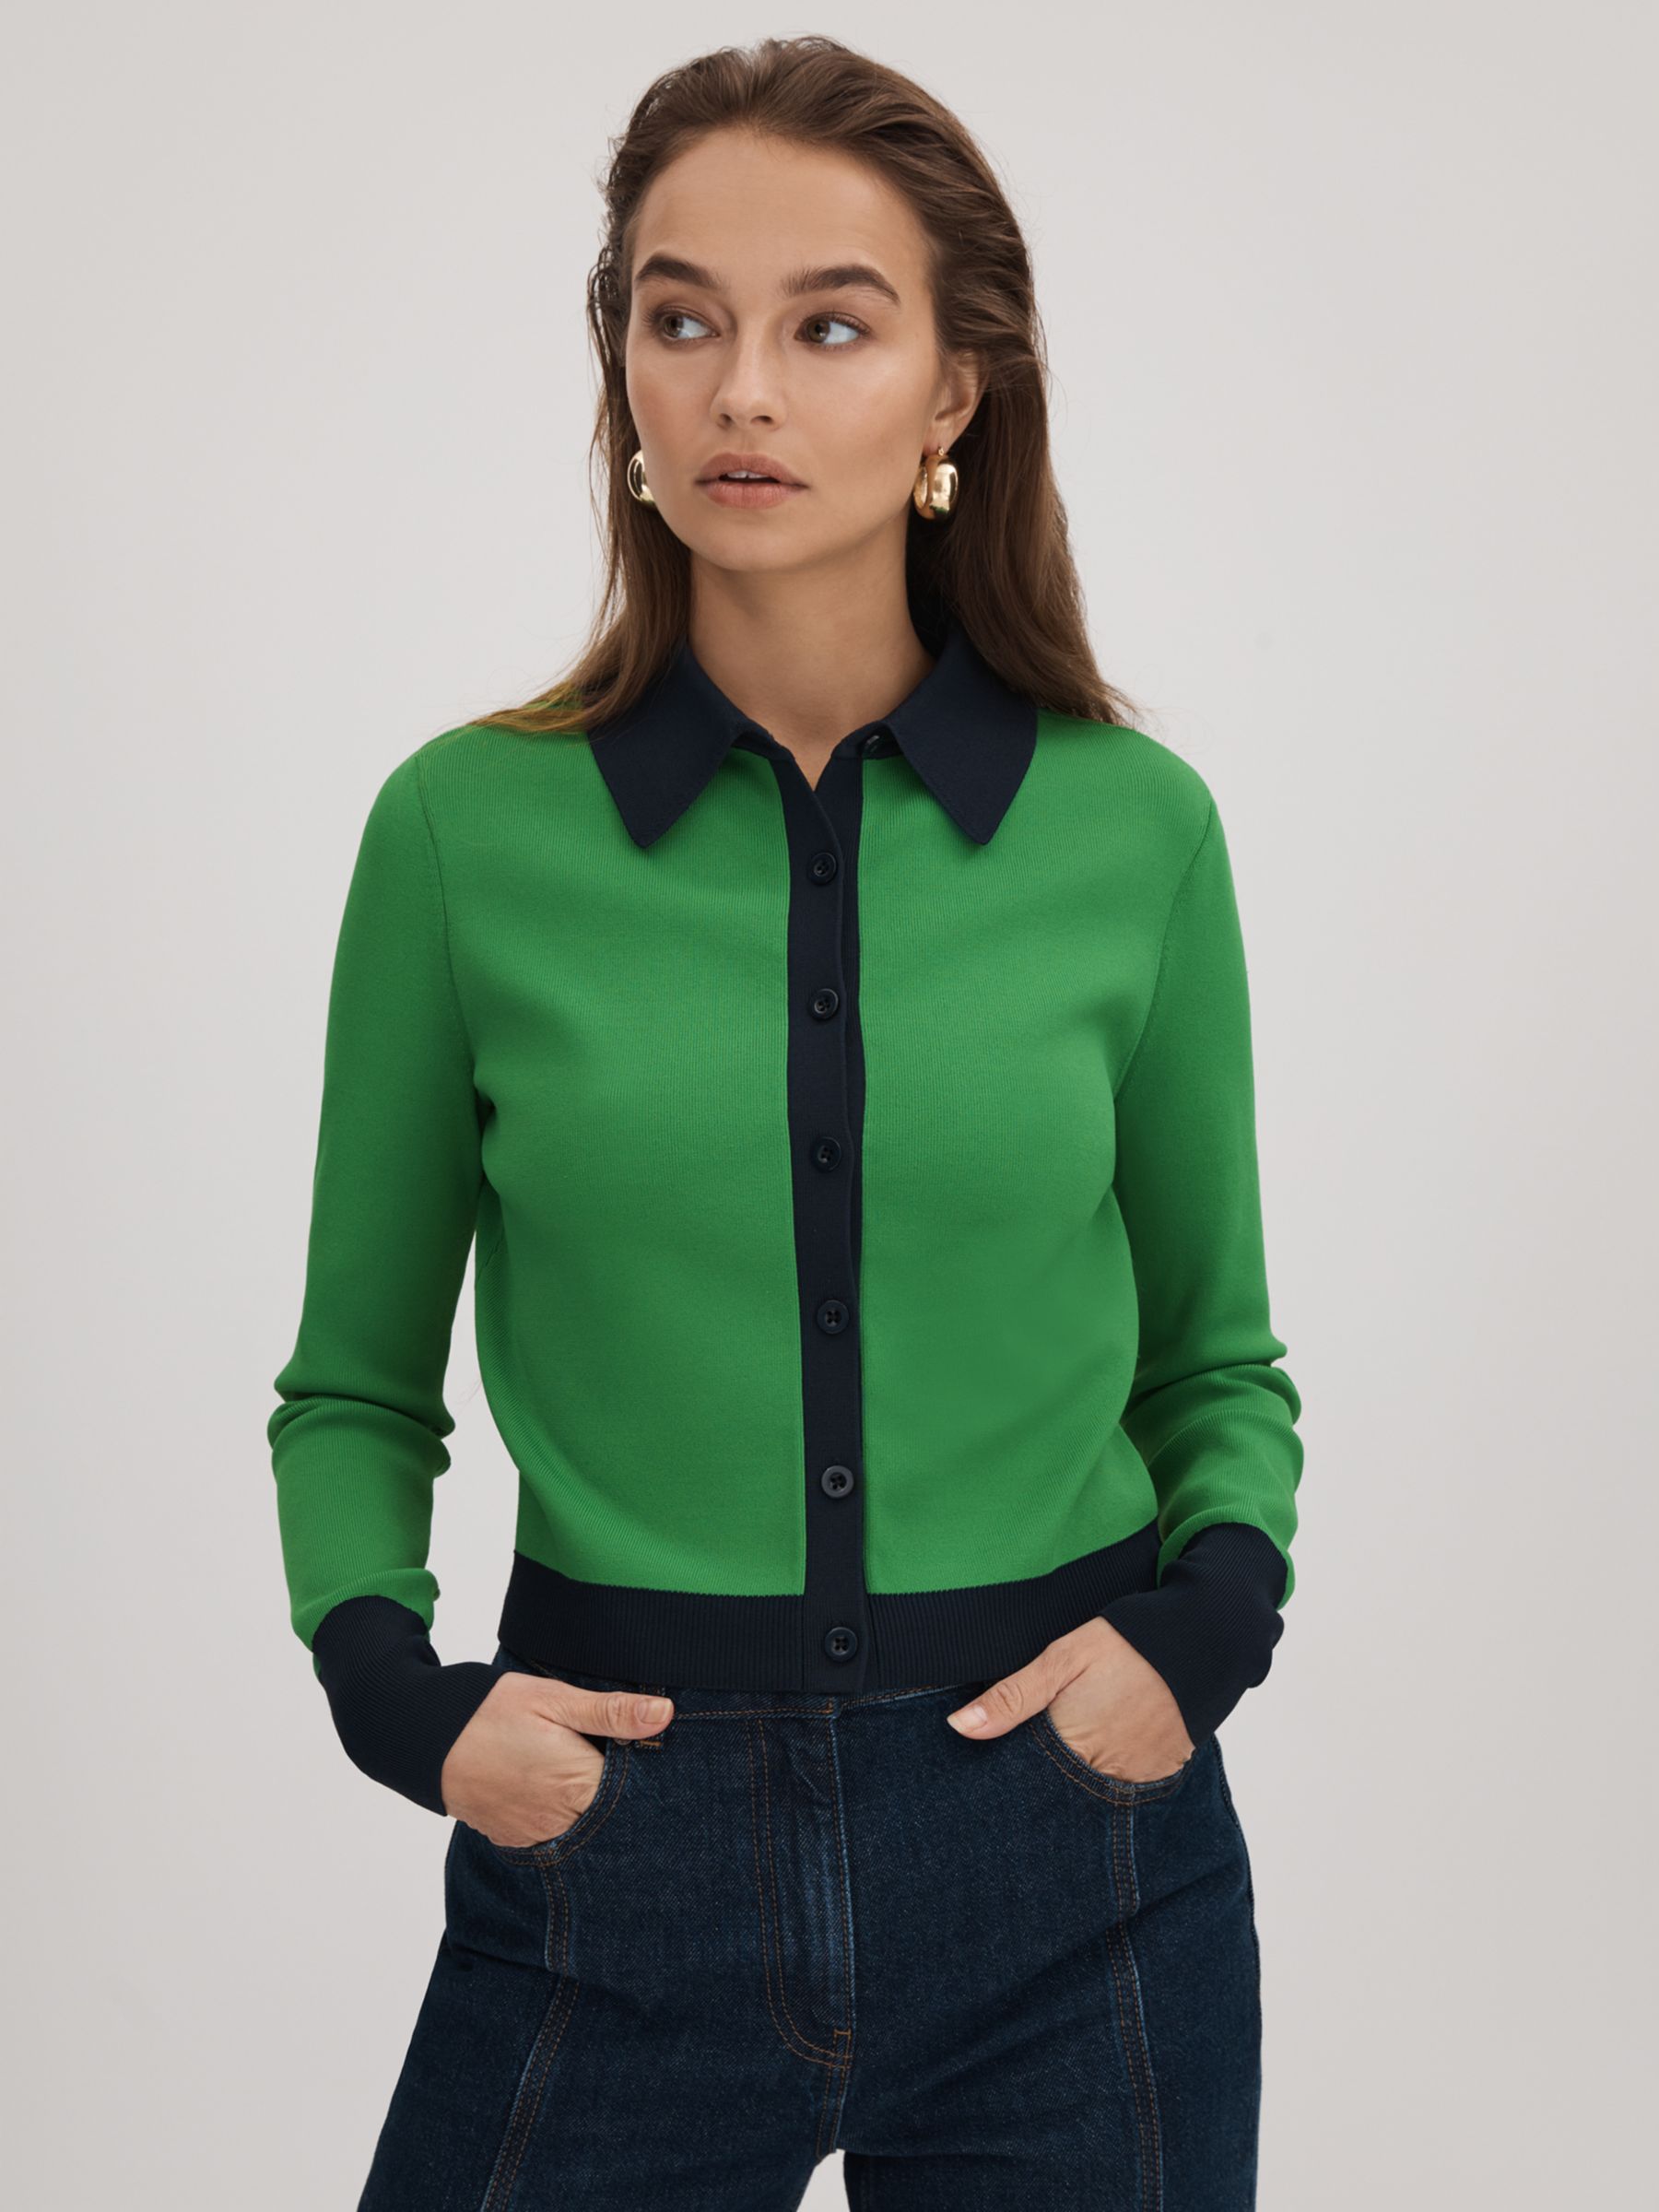 FLORERE Fitted Contrast Trim Cardigan, Bright Green/Navy, 10